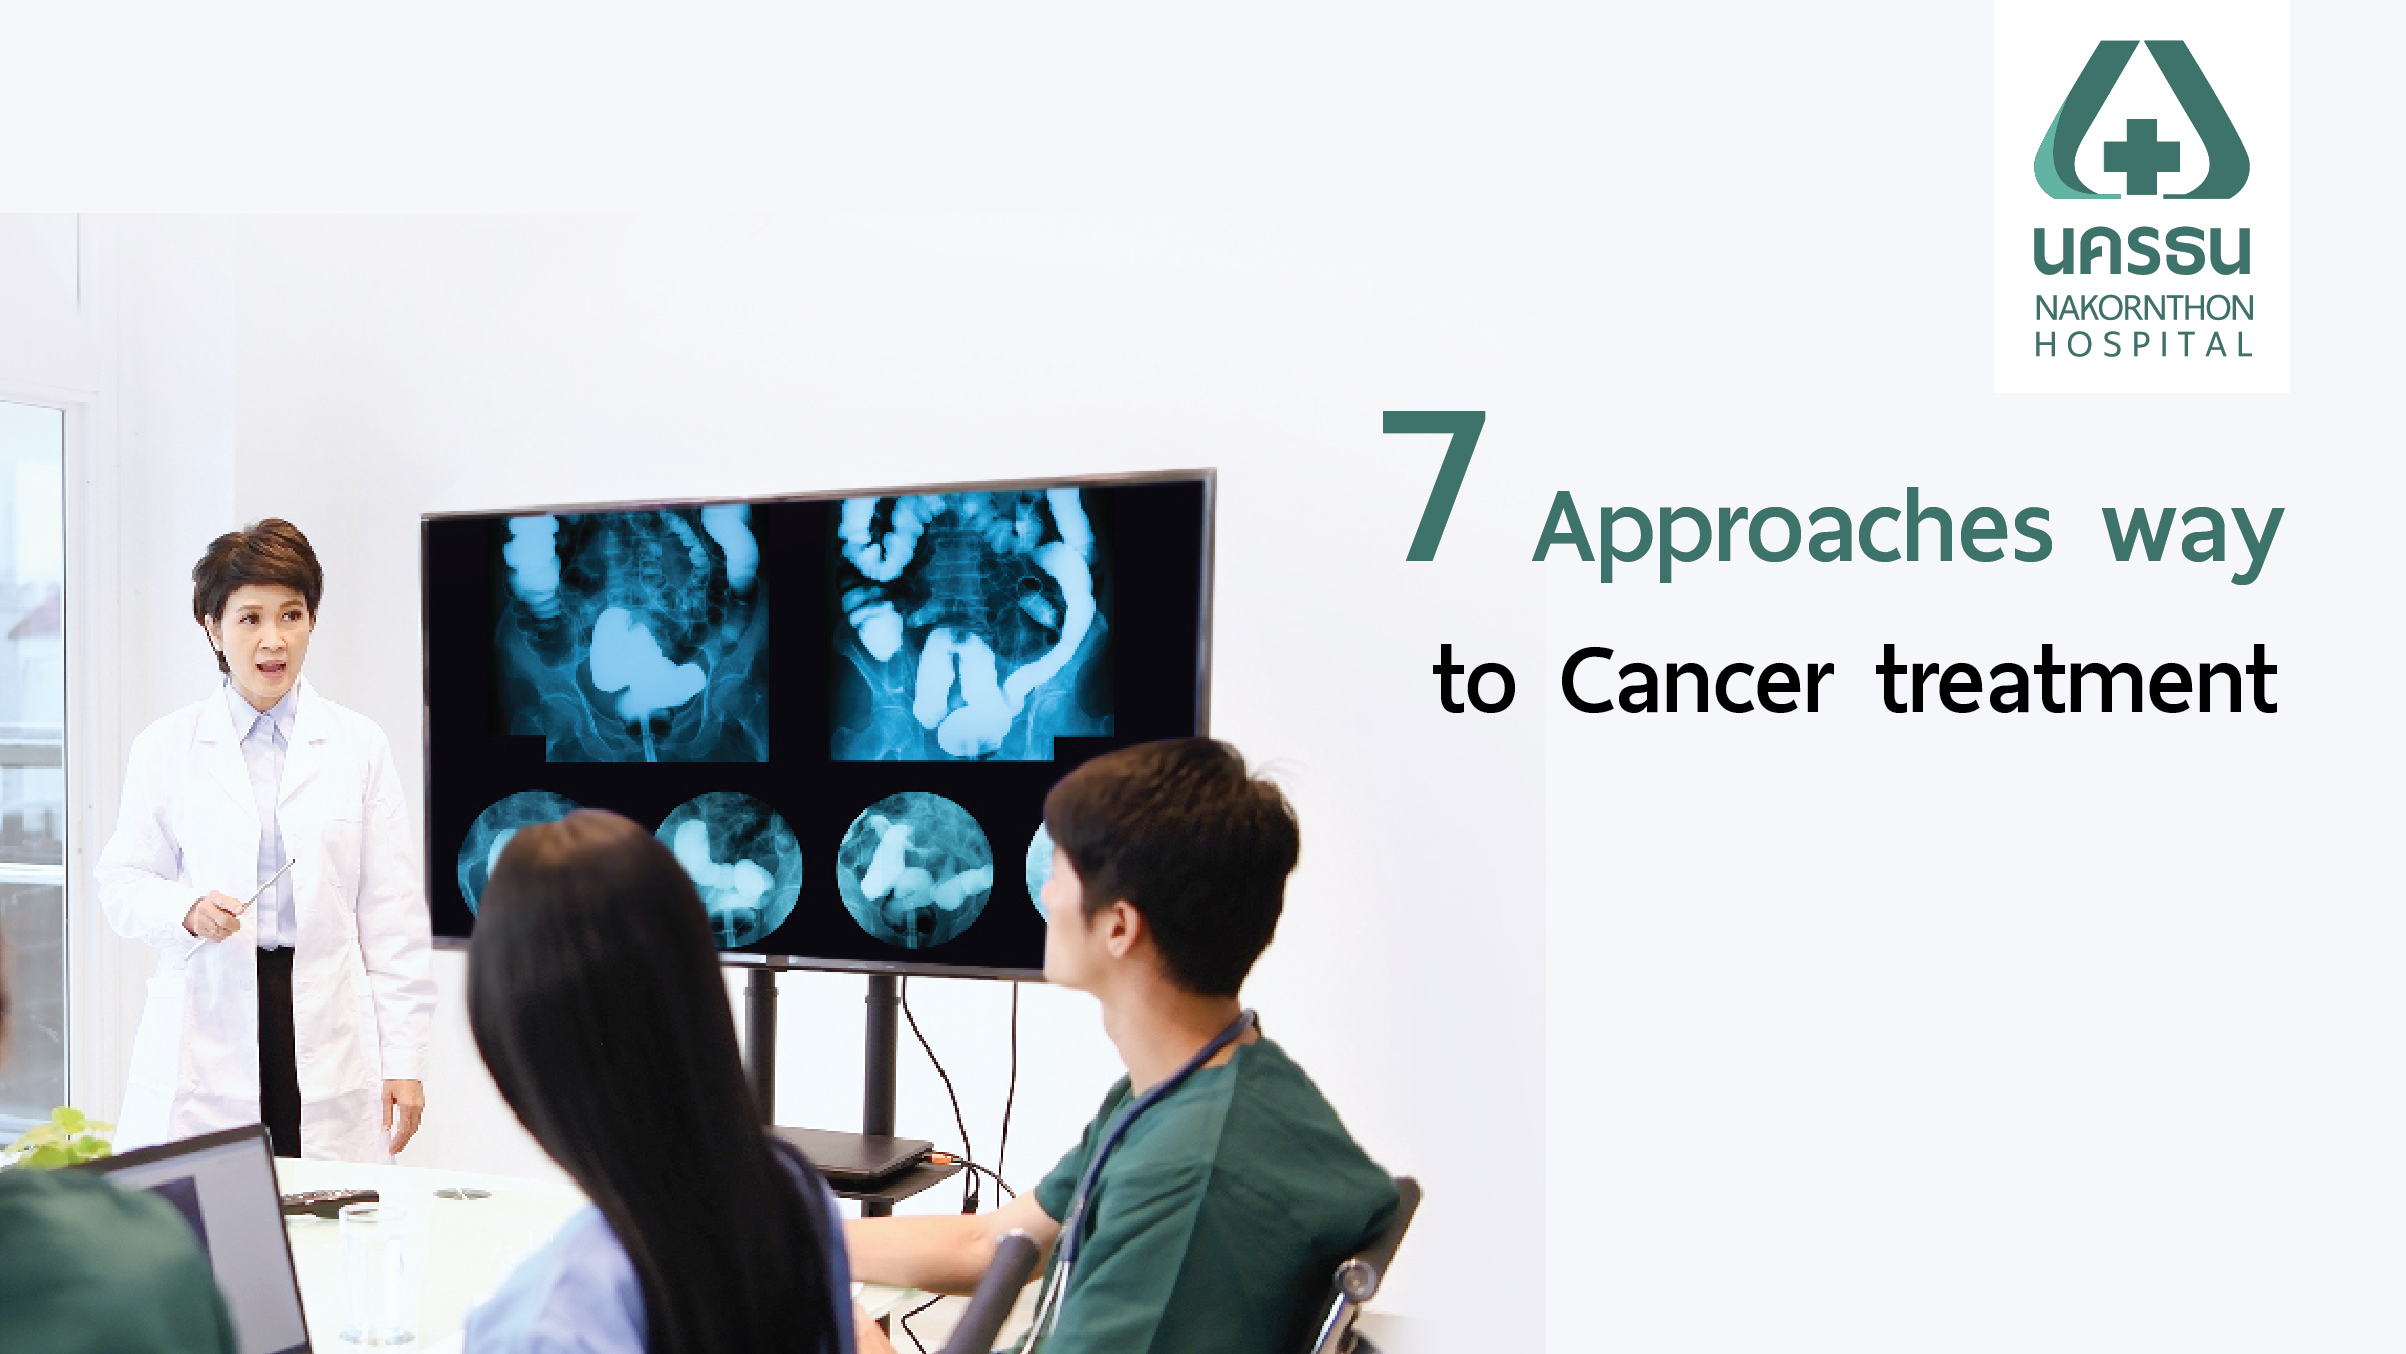 Current cancer treatment guidelines. It may be any one method or a combination of methods